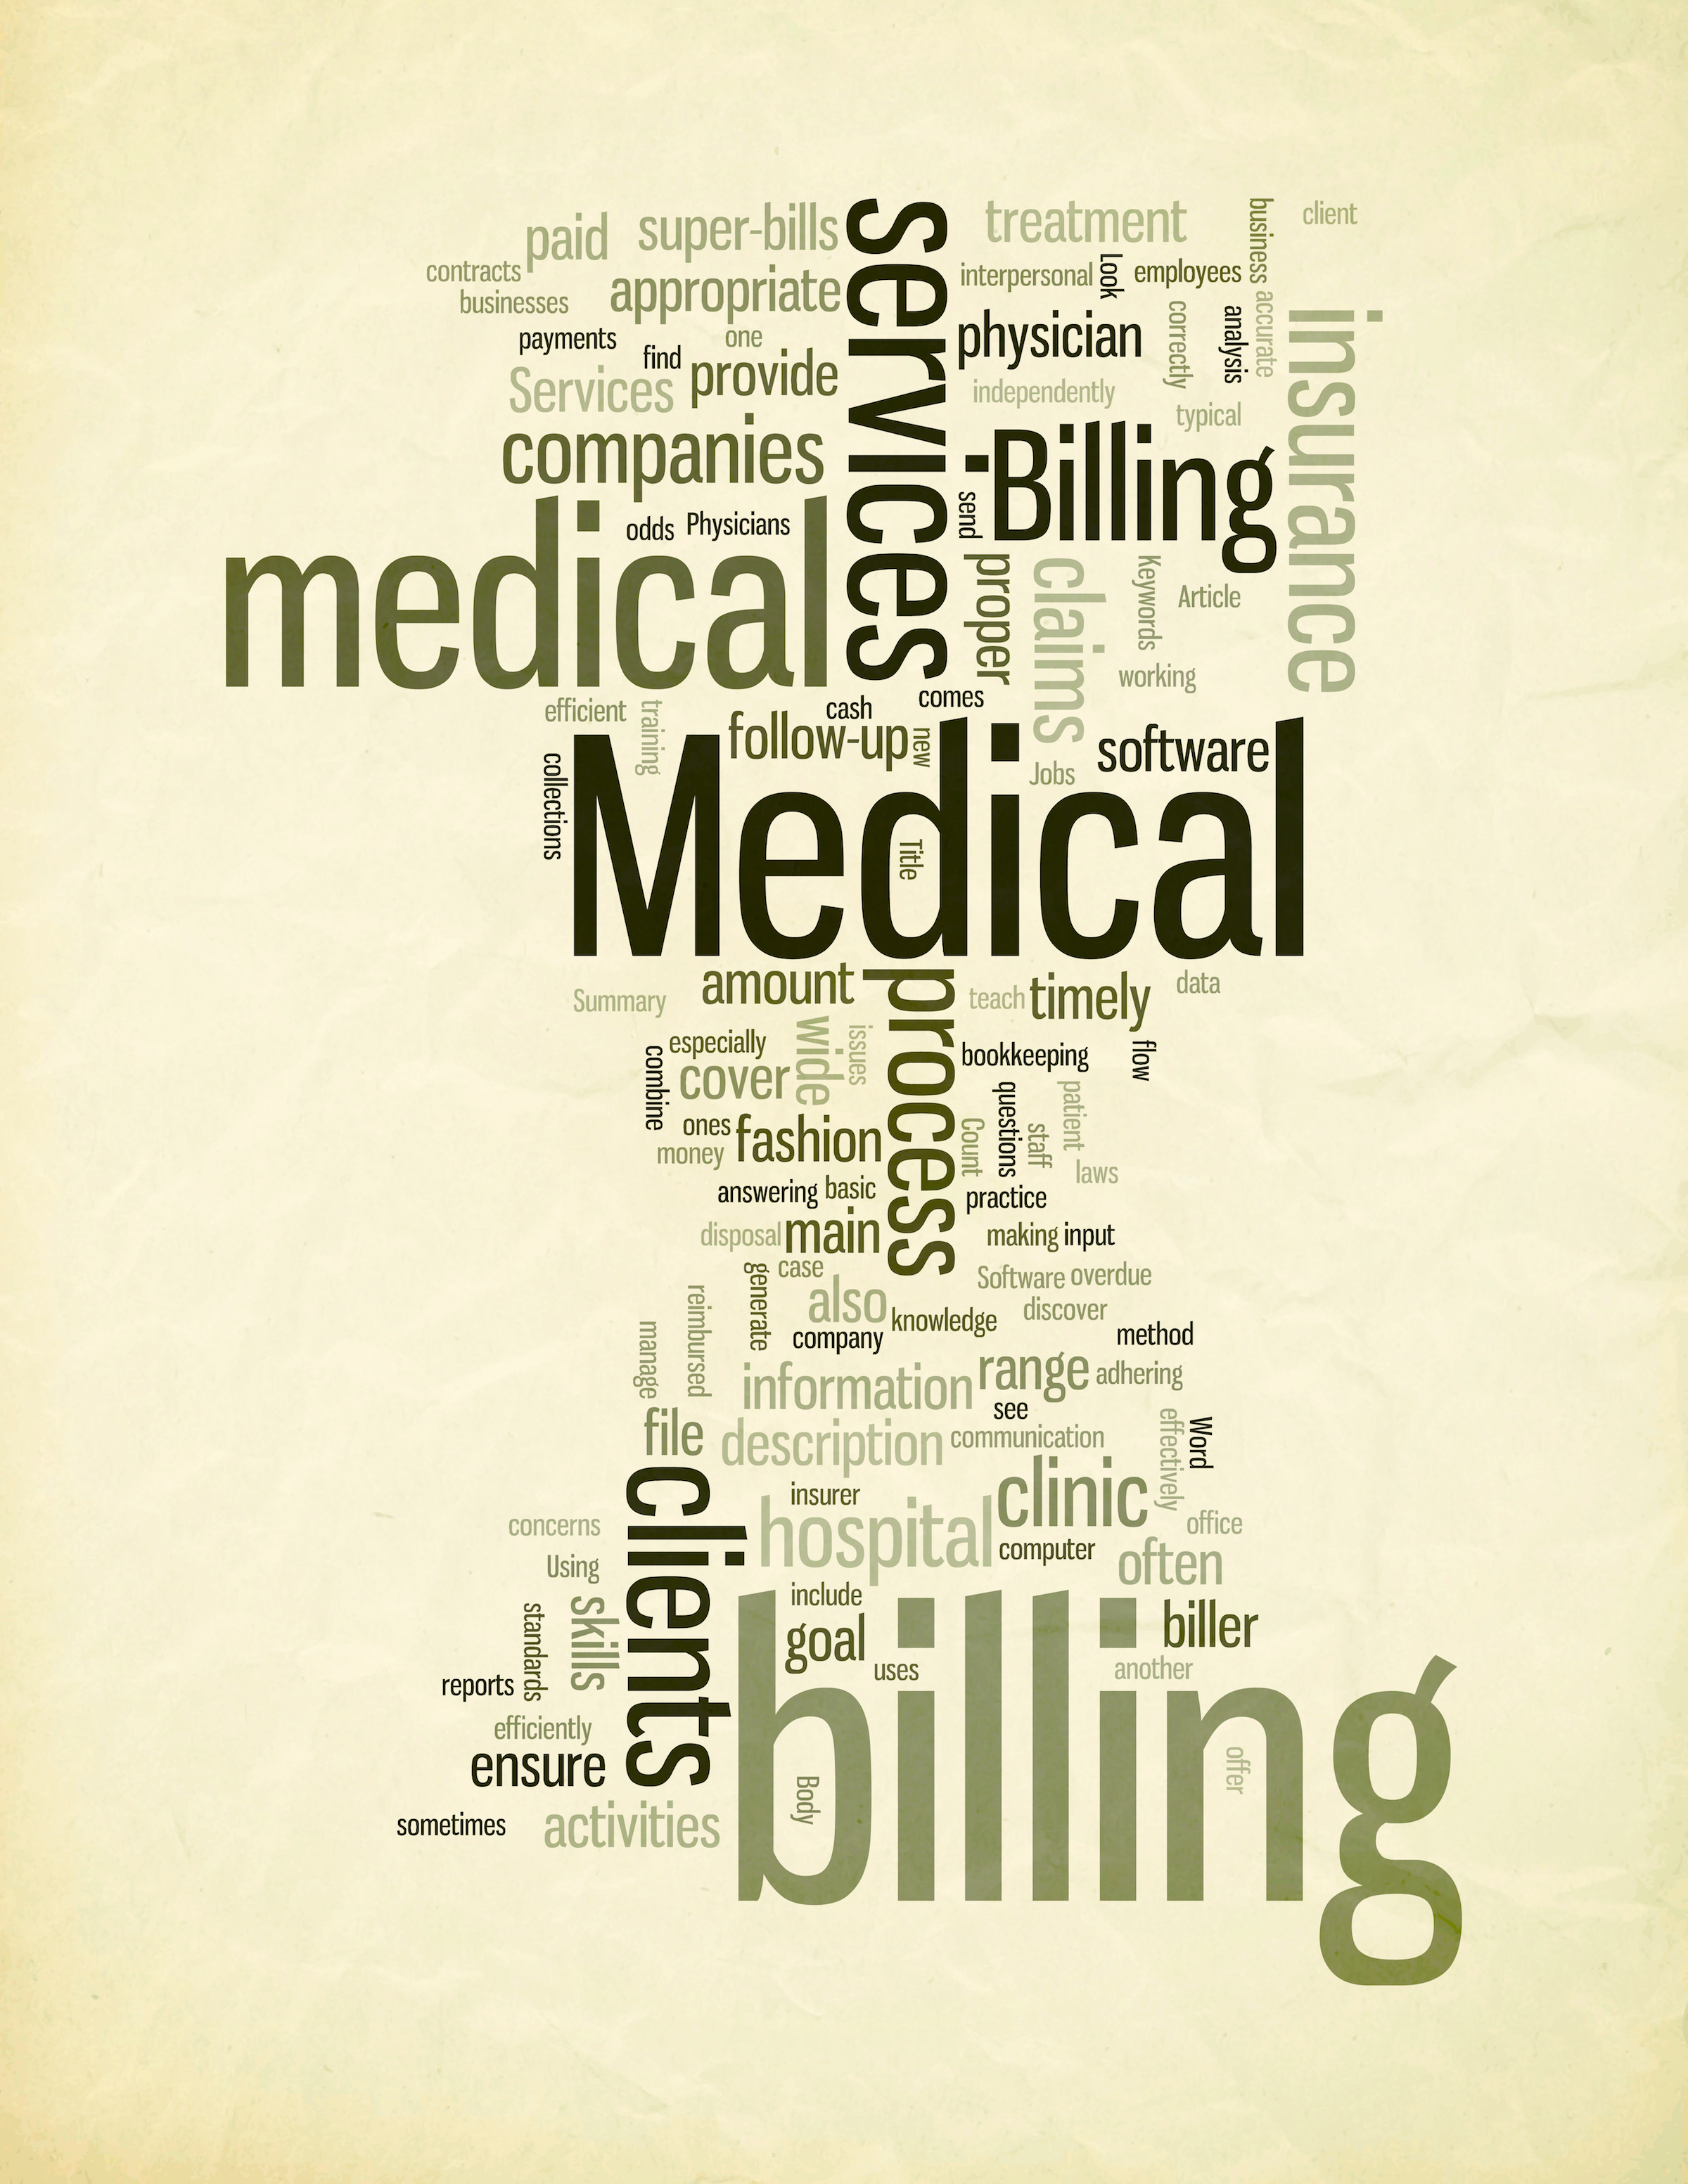 If you run a practice and are considering outsourcing your medical billing, you should look at the following factors to see if it's the best decision.